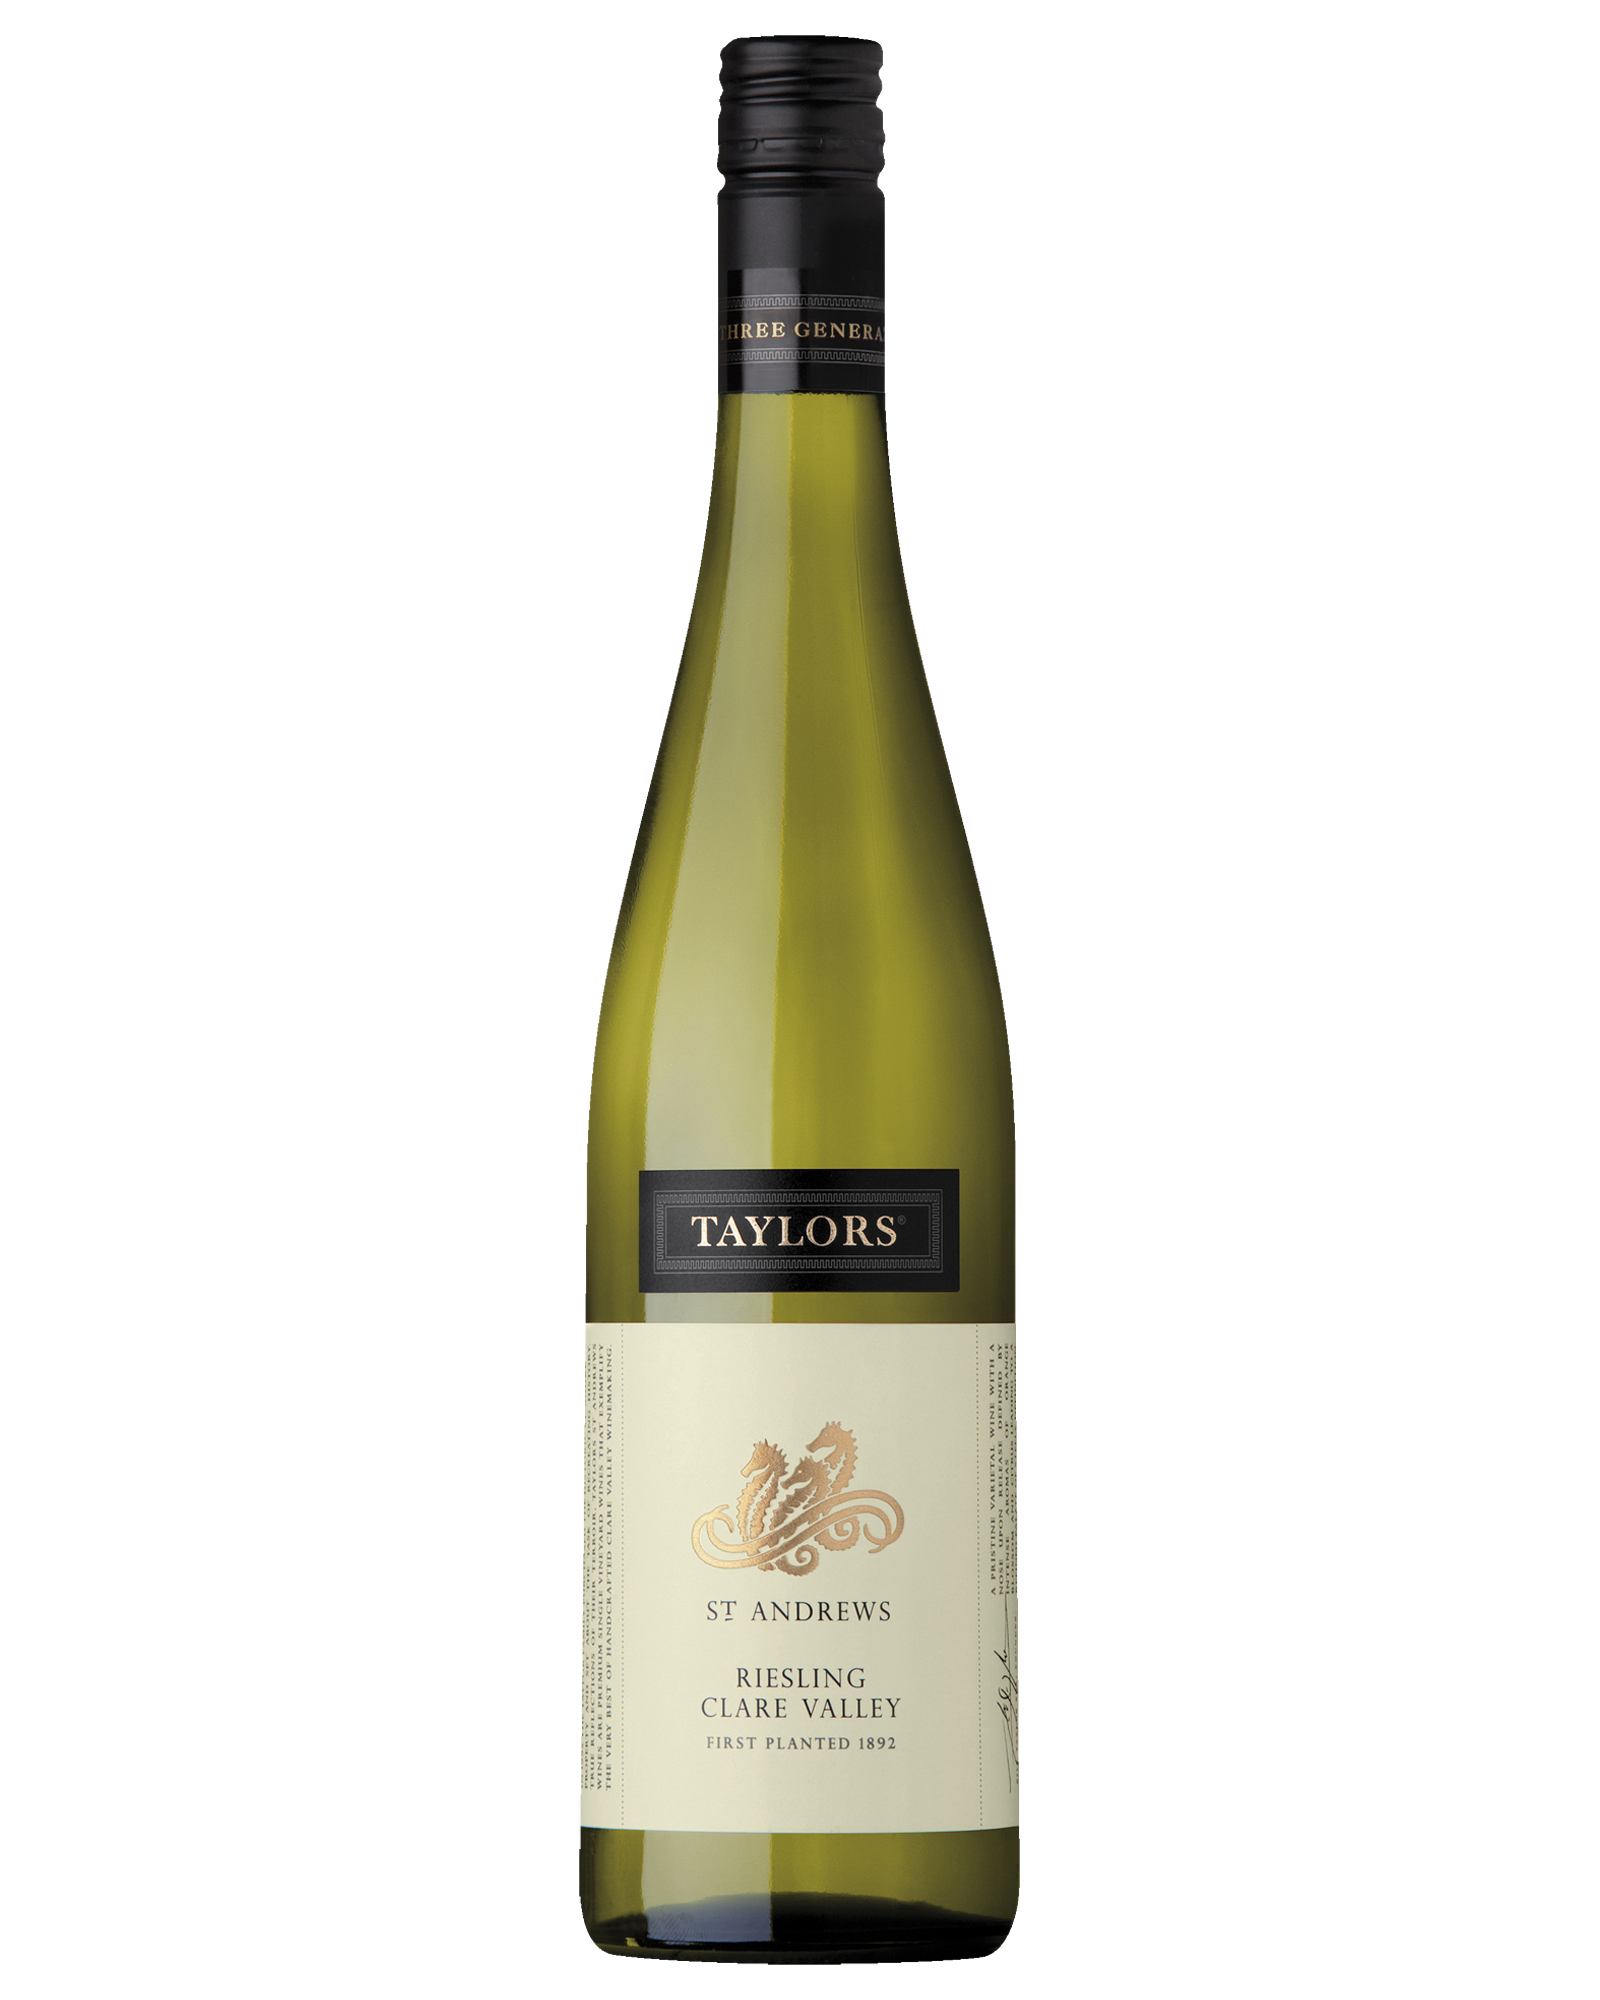 Taylors St Andrews Riesling 2013